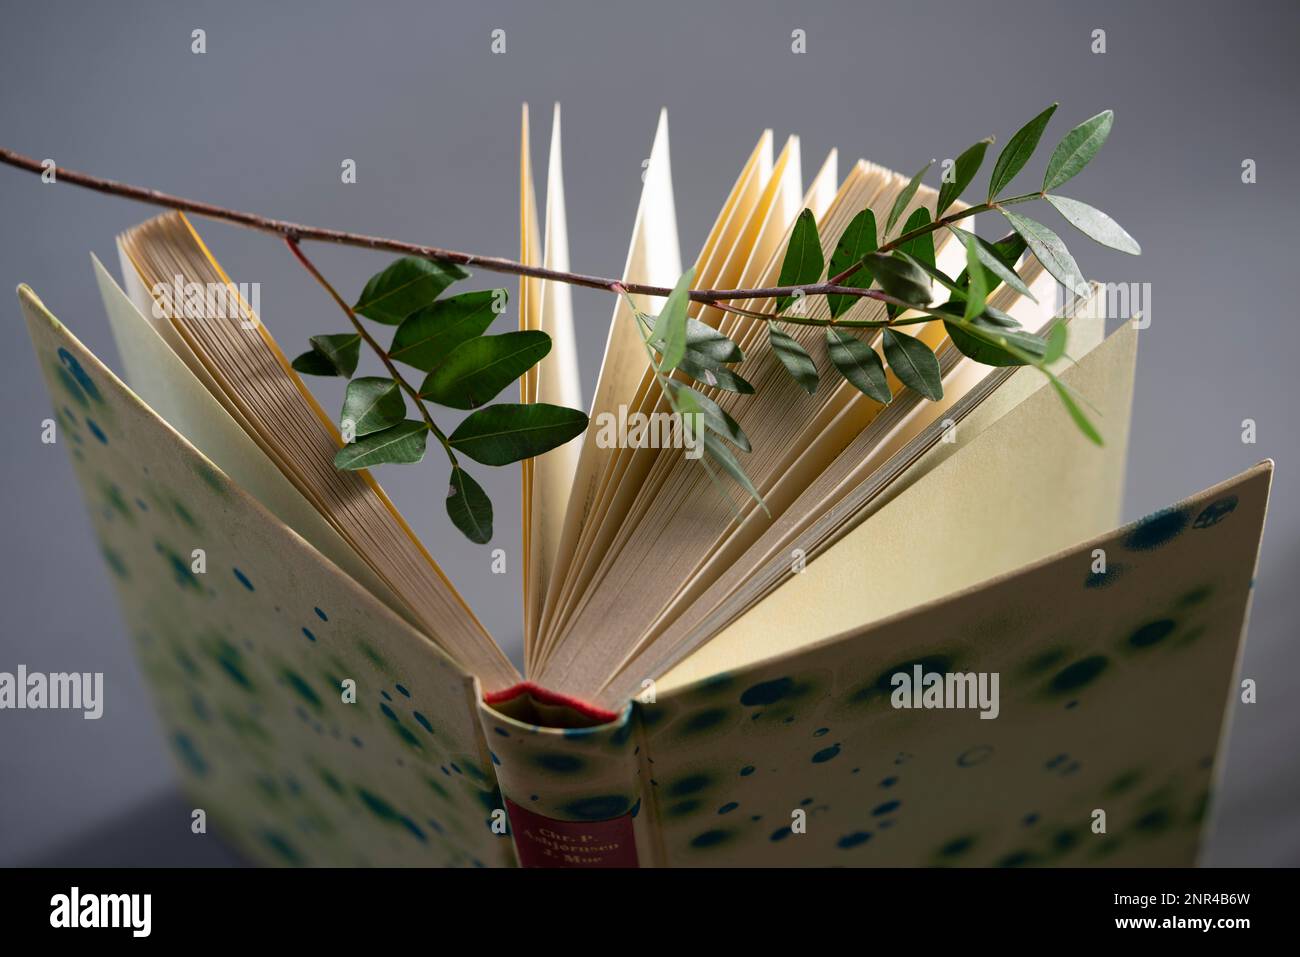 Open book with decorative branch, grey background, still life Stock Photo